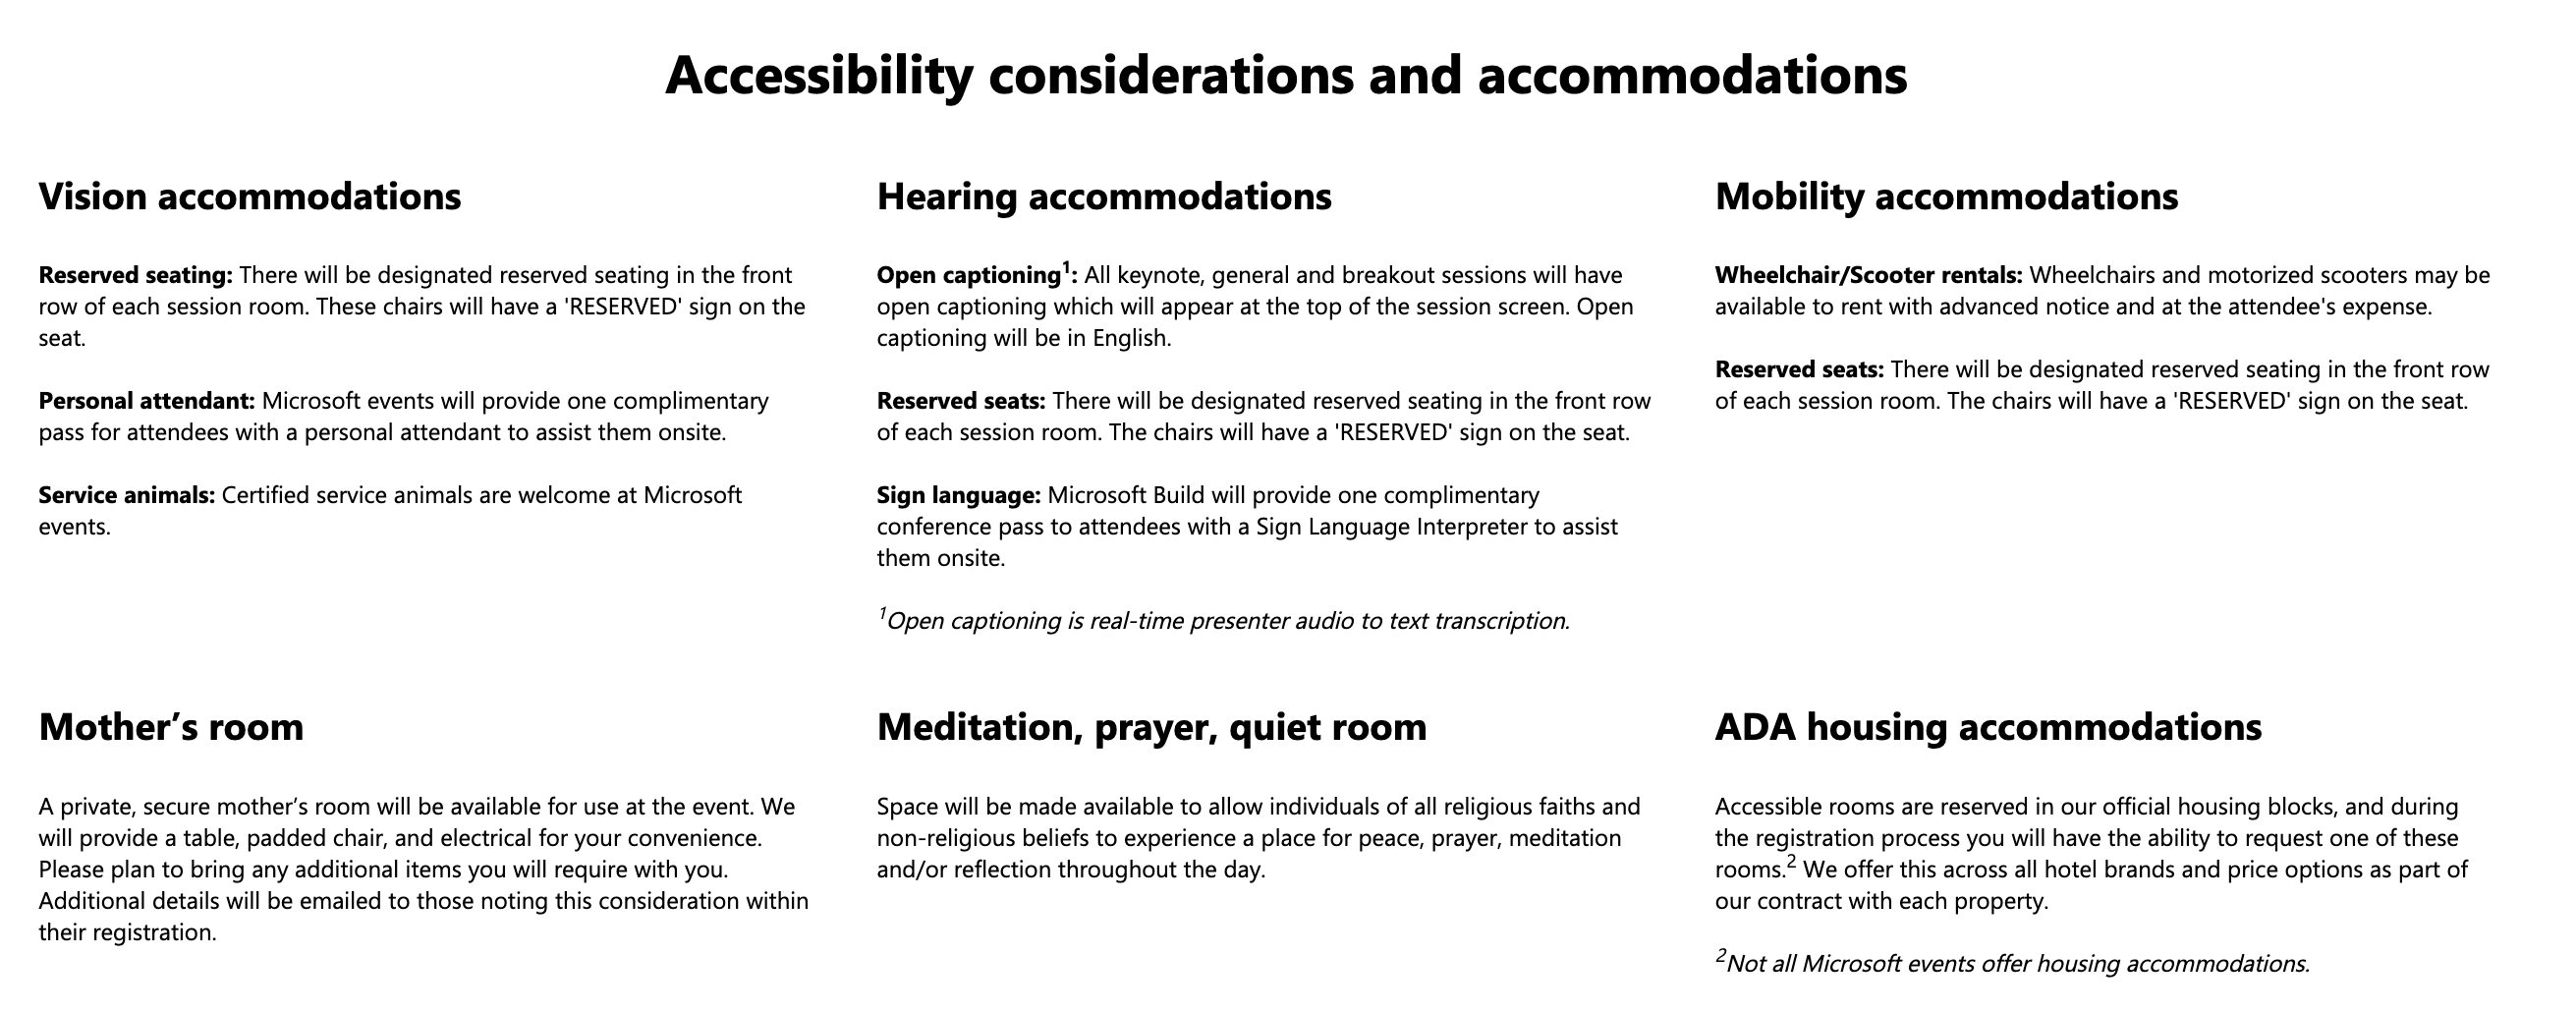 Example of accessibility offers at a Microsoft event 